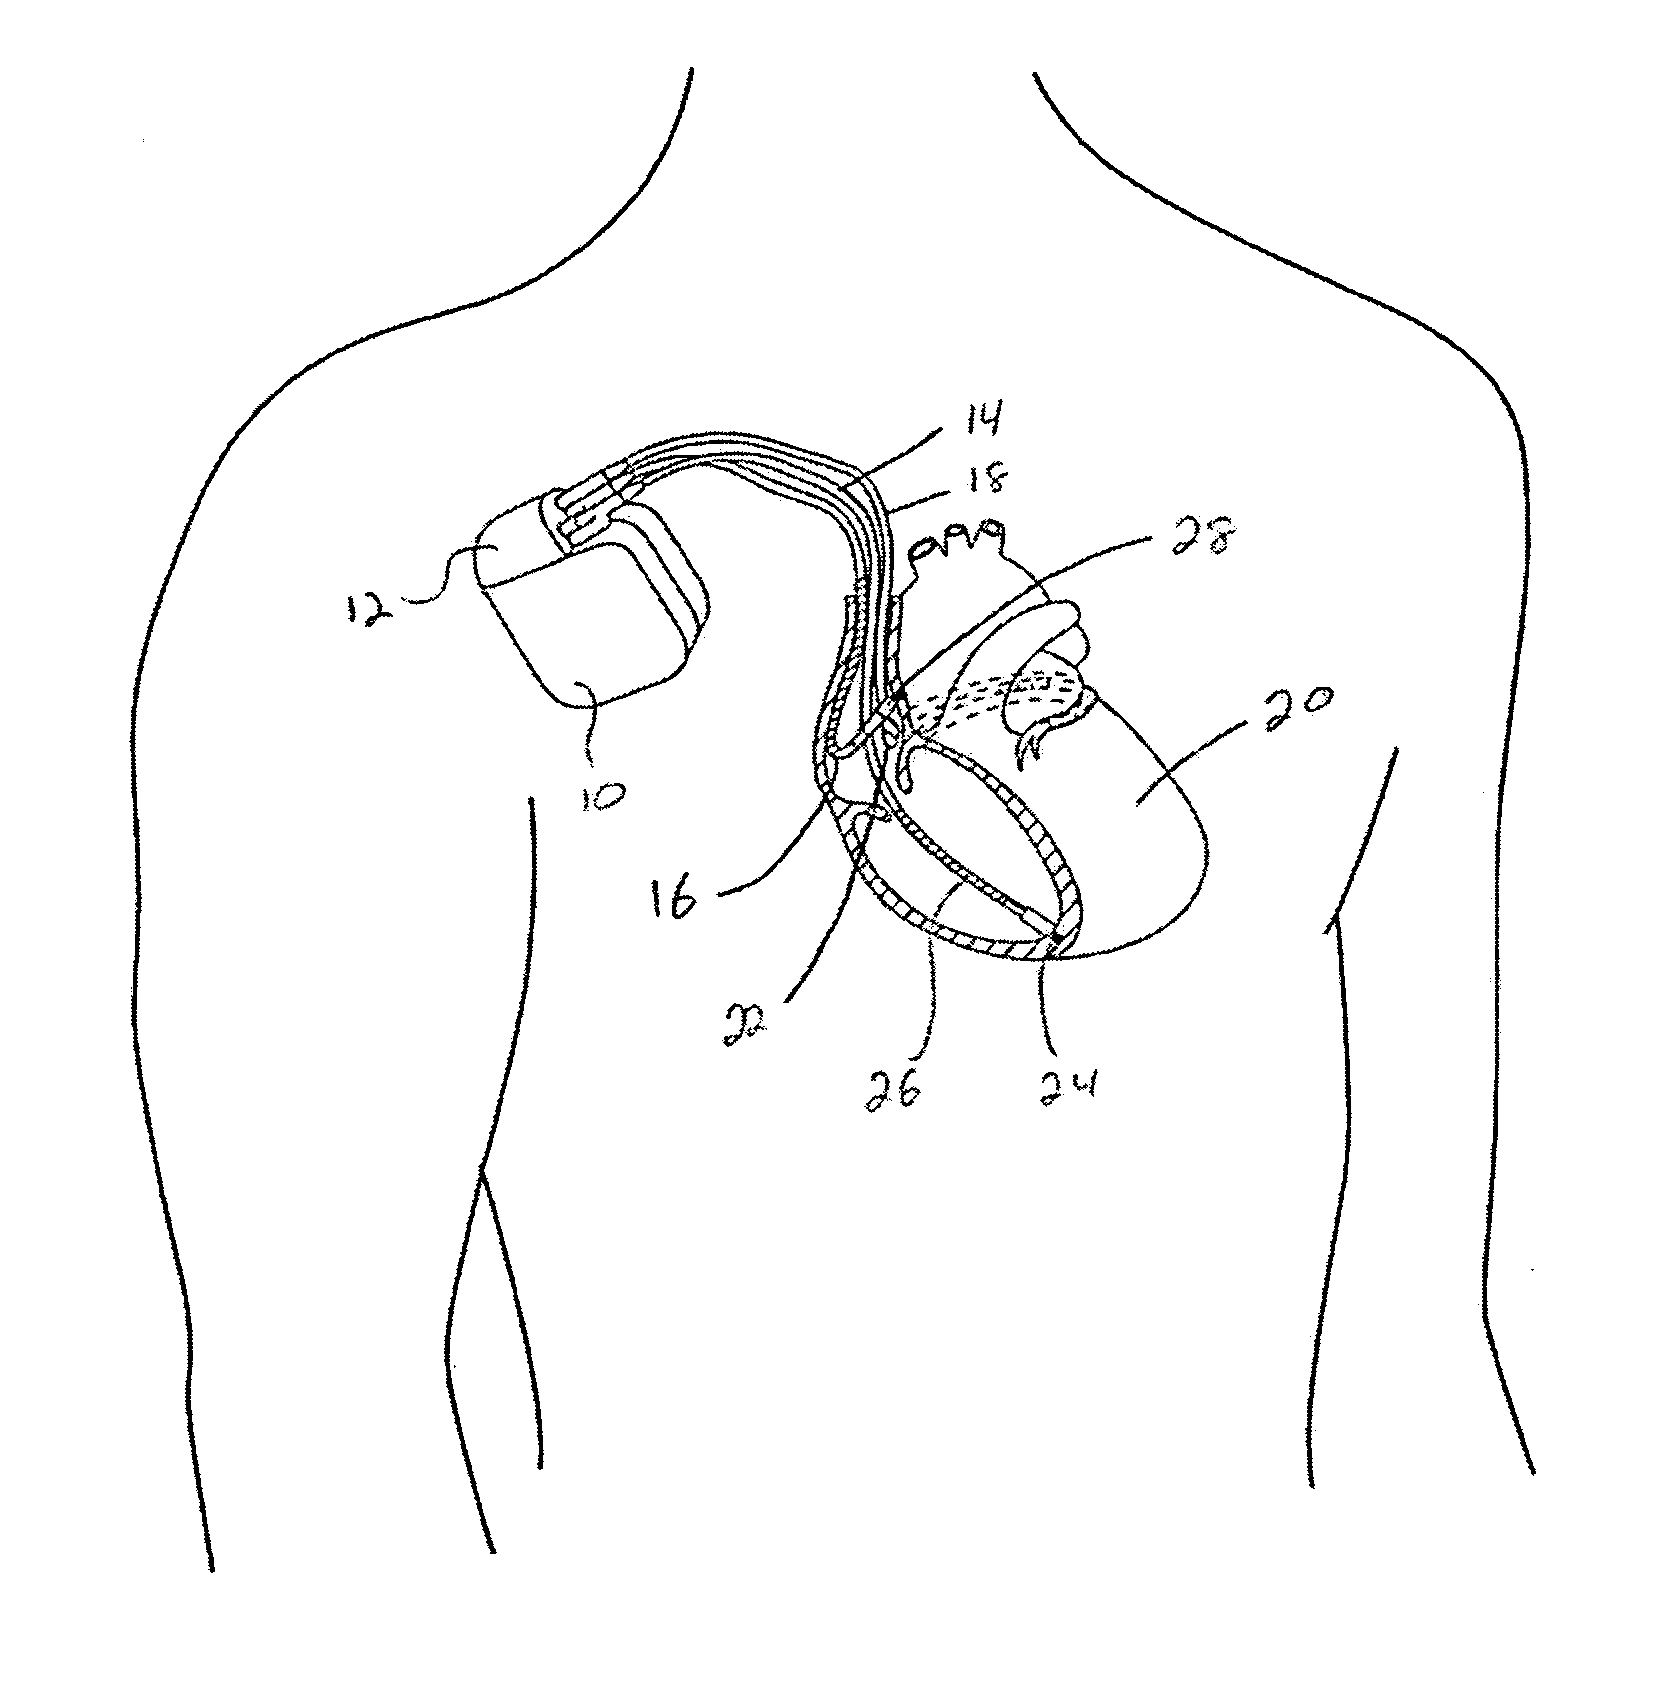 Trans-septal anchoring system and method